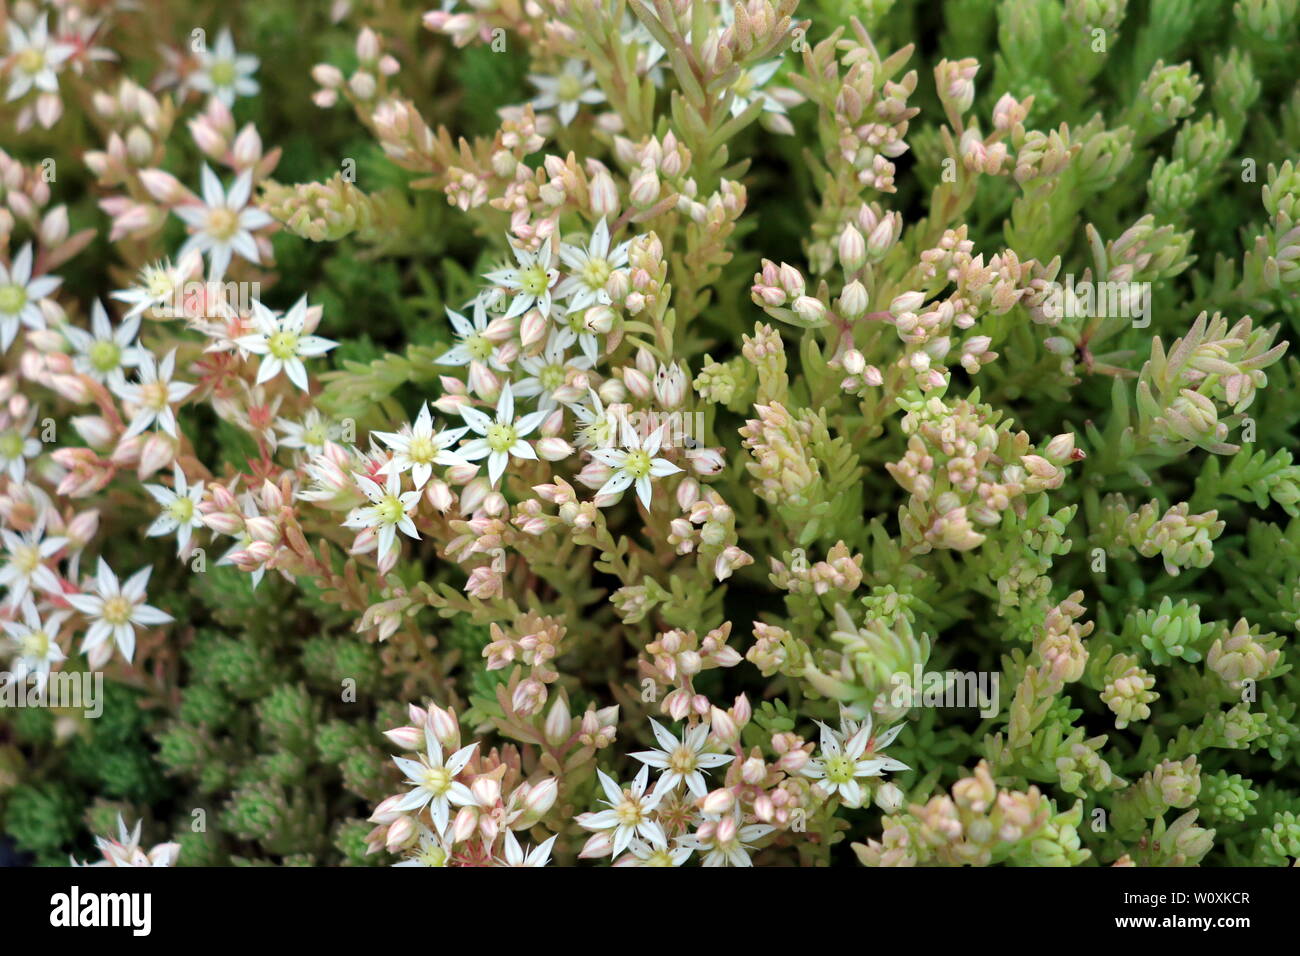 Sedum or Stonecrop hardy succulent ground cover perennial light green plants with thick succulent leaves and fleshy stems with flowers Stock Photo